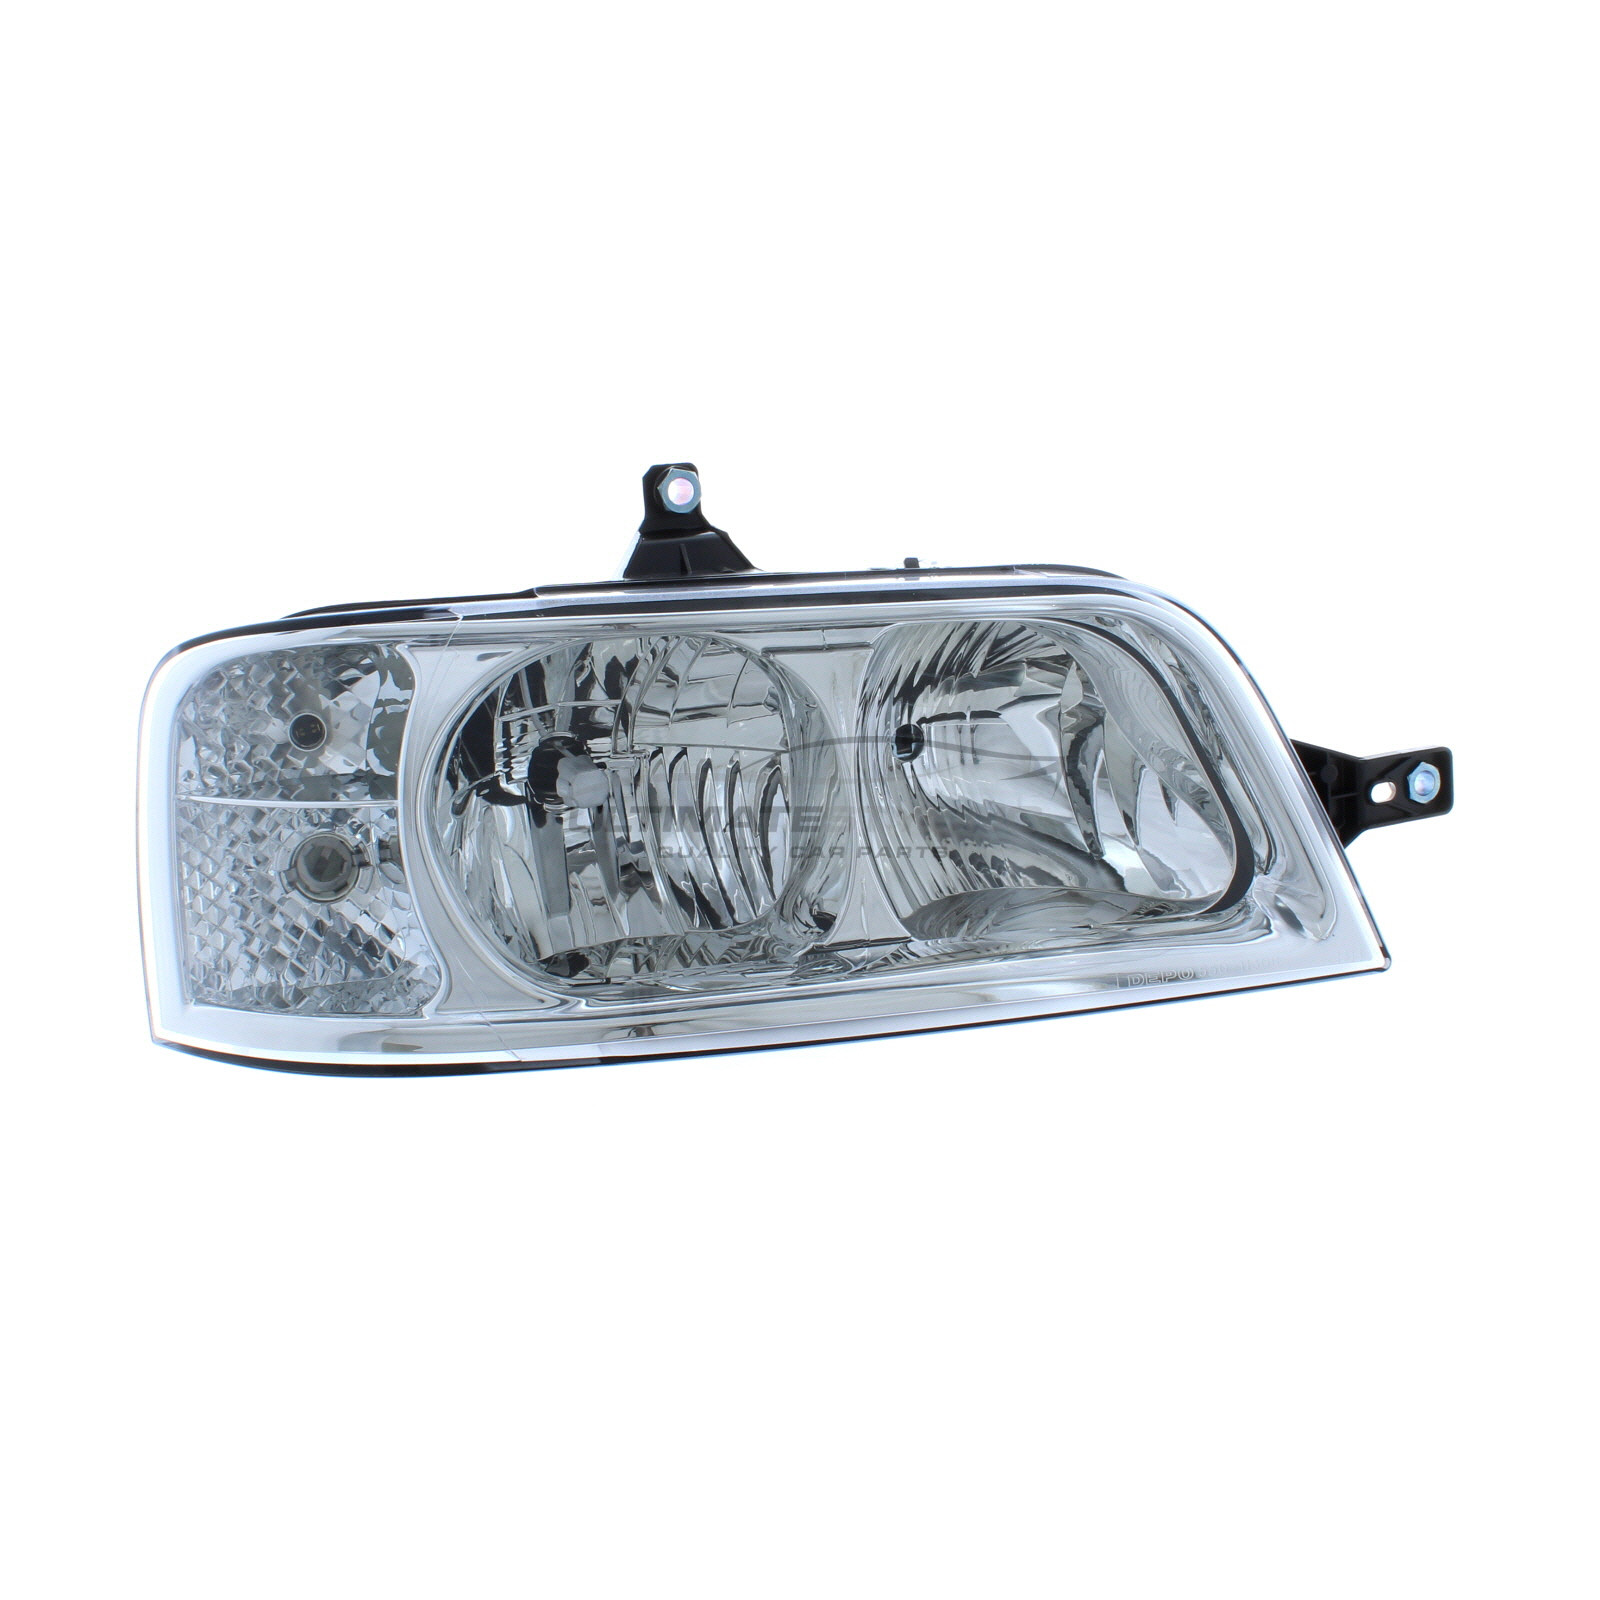 Citroen Relay 2002-2006, Fiat Ducato 2002-2006, Peugeot Boxer 2002-2006 Halogen, Electric Without Motor, Chrome Headlight / Headlamp Drivers Side (RH)